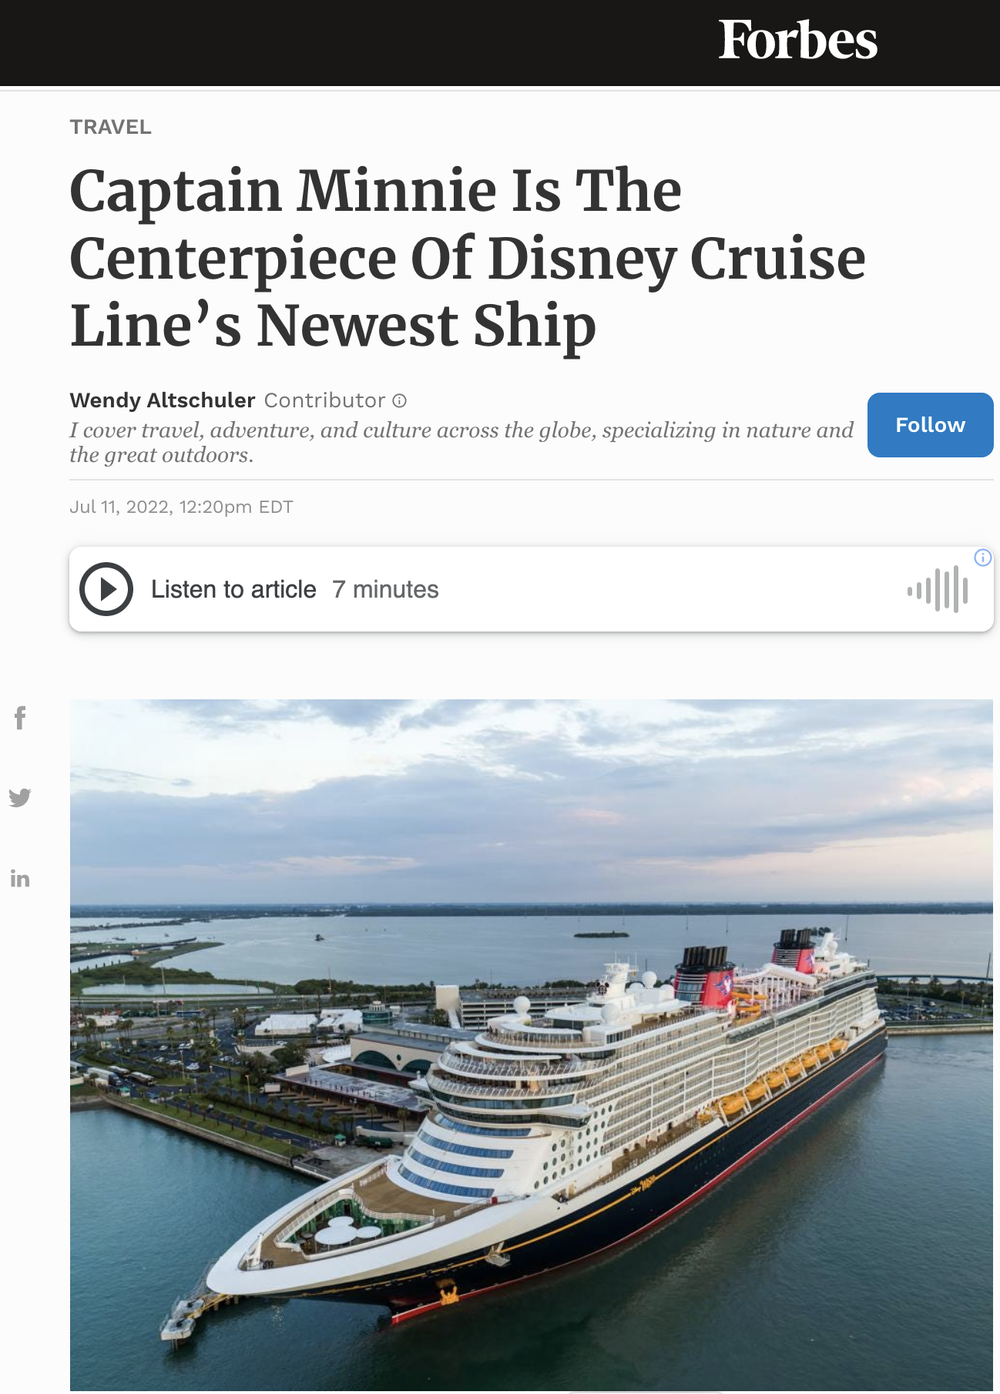 Captain Minnie Is The Centerpiece Of Disney Cruise Line’s Newest Ship